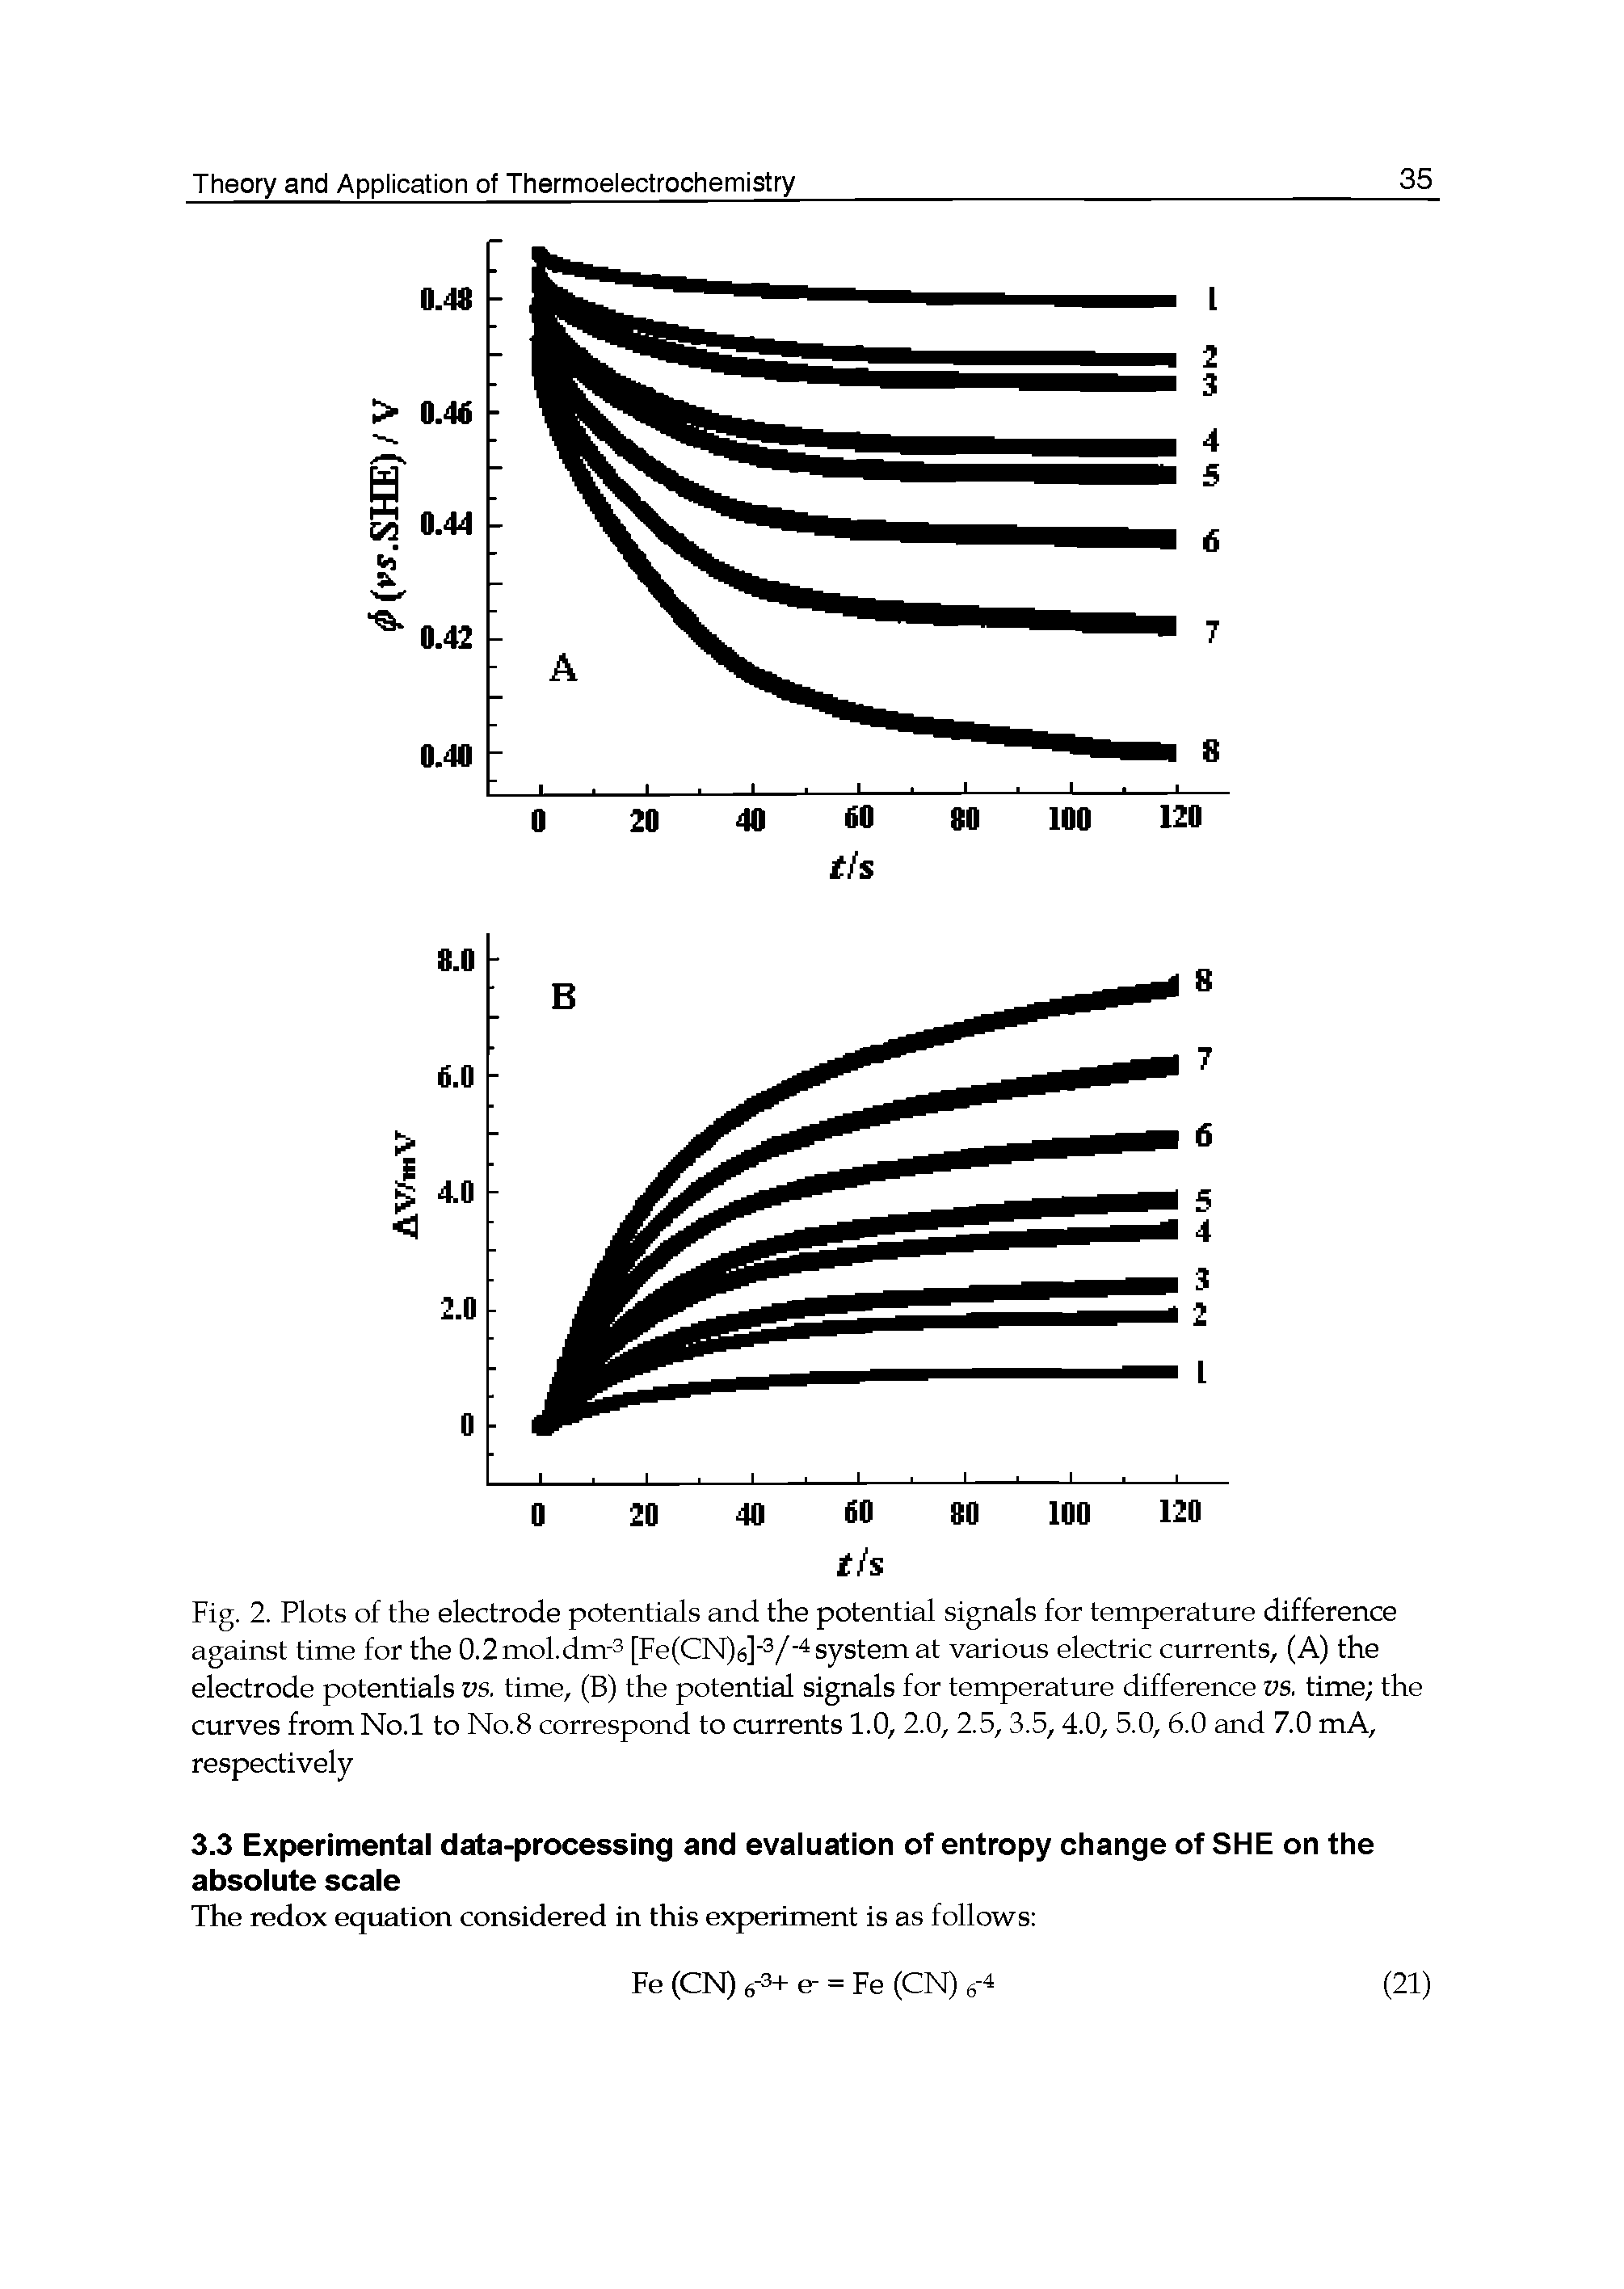 Fig. 2. Plots of the electrode potentials and the potential signals for temperature difference against time for the 0.2mol.dm-3 [Fe(CN)6] / system at various electric currents, (A) the electrode potentials vs. time, (B) the potential signals for temperature difference vs. time the curves from No.l to No.8 correspond to currents 1.0, 2.0, 2.5,3.5,4.0, 5.0, 6.0 and 7.0 mA, respectively...